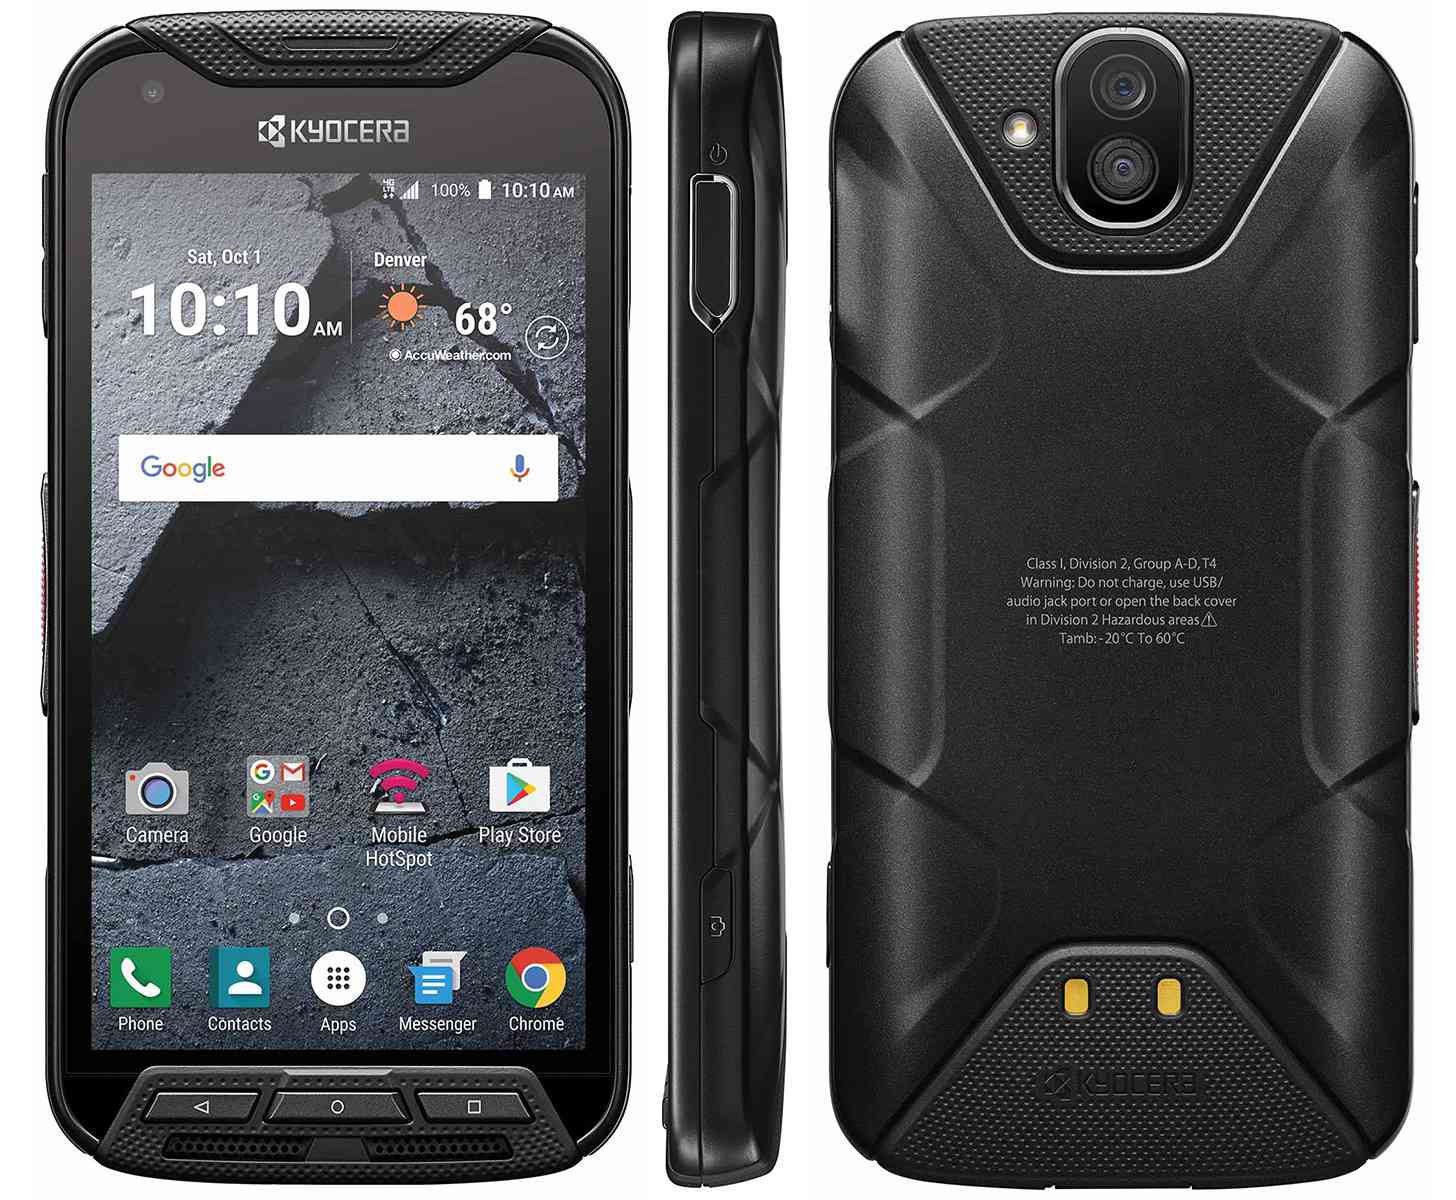 Kyocera DuraForce Pro T-Mobile official